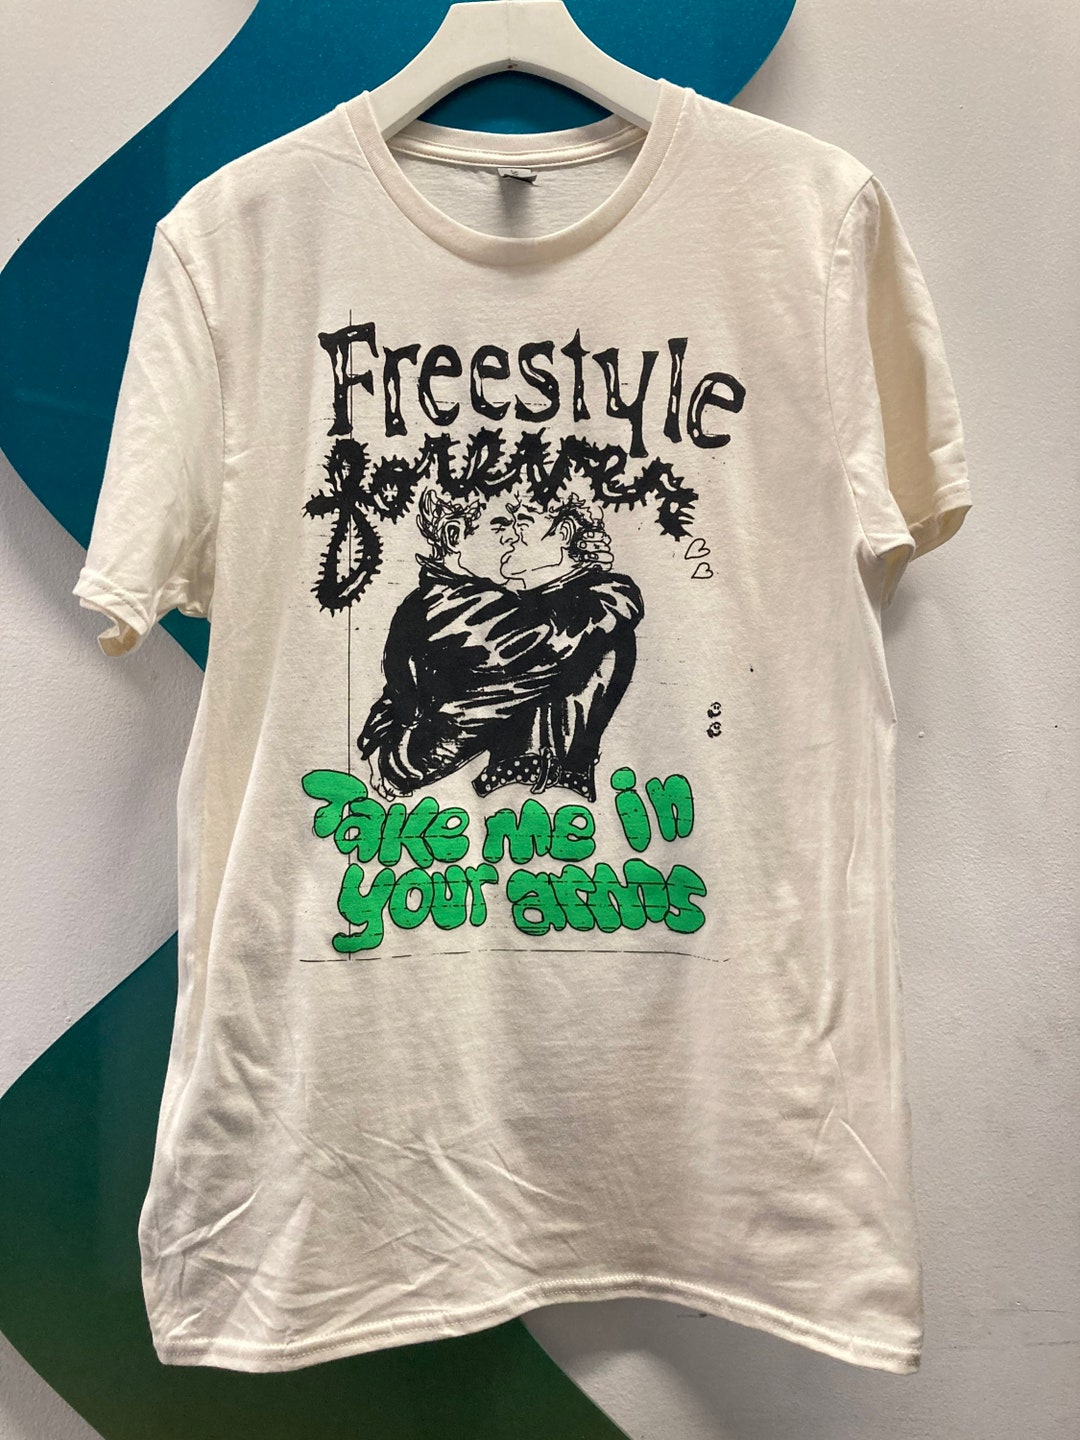 Freestyle Forever by Mony Kaos - Etsy